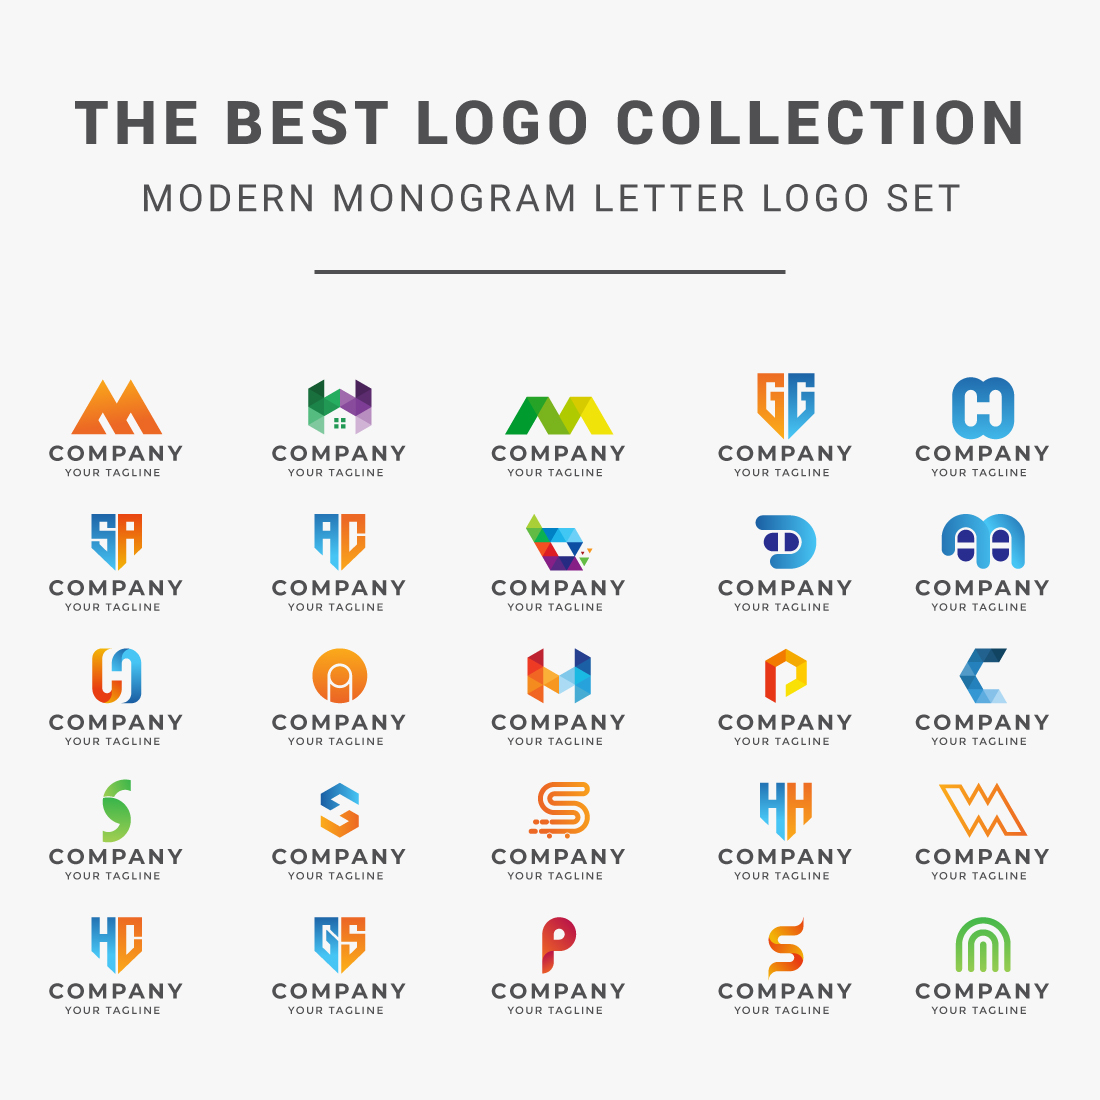 25 Logos Bundle Modern Monogram Letter Logo Set for a different types of businesses preview image.